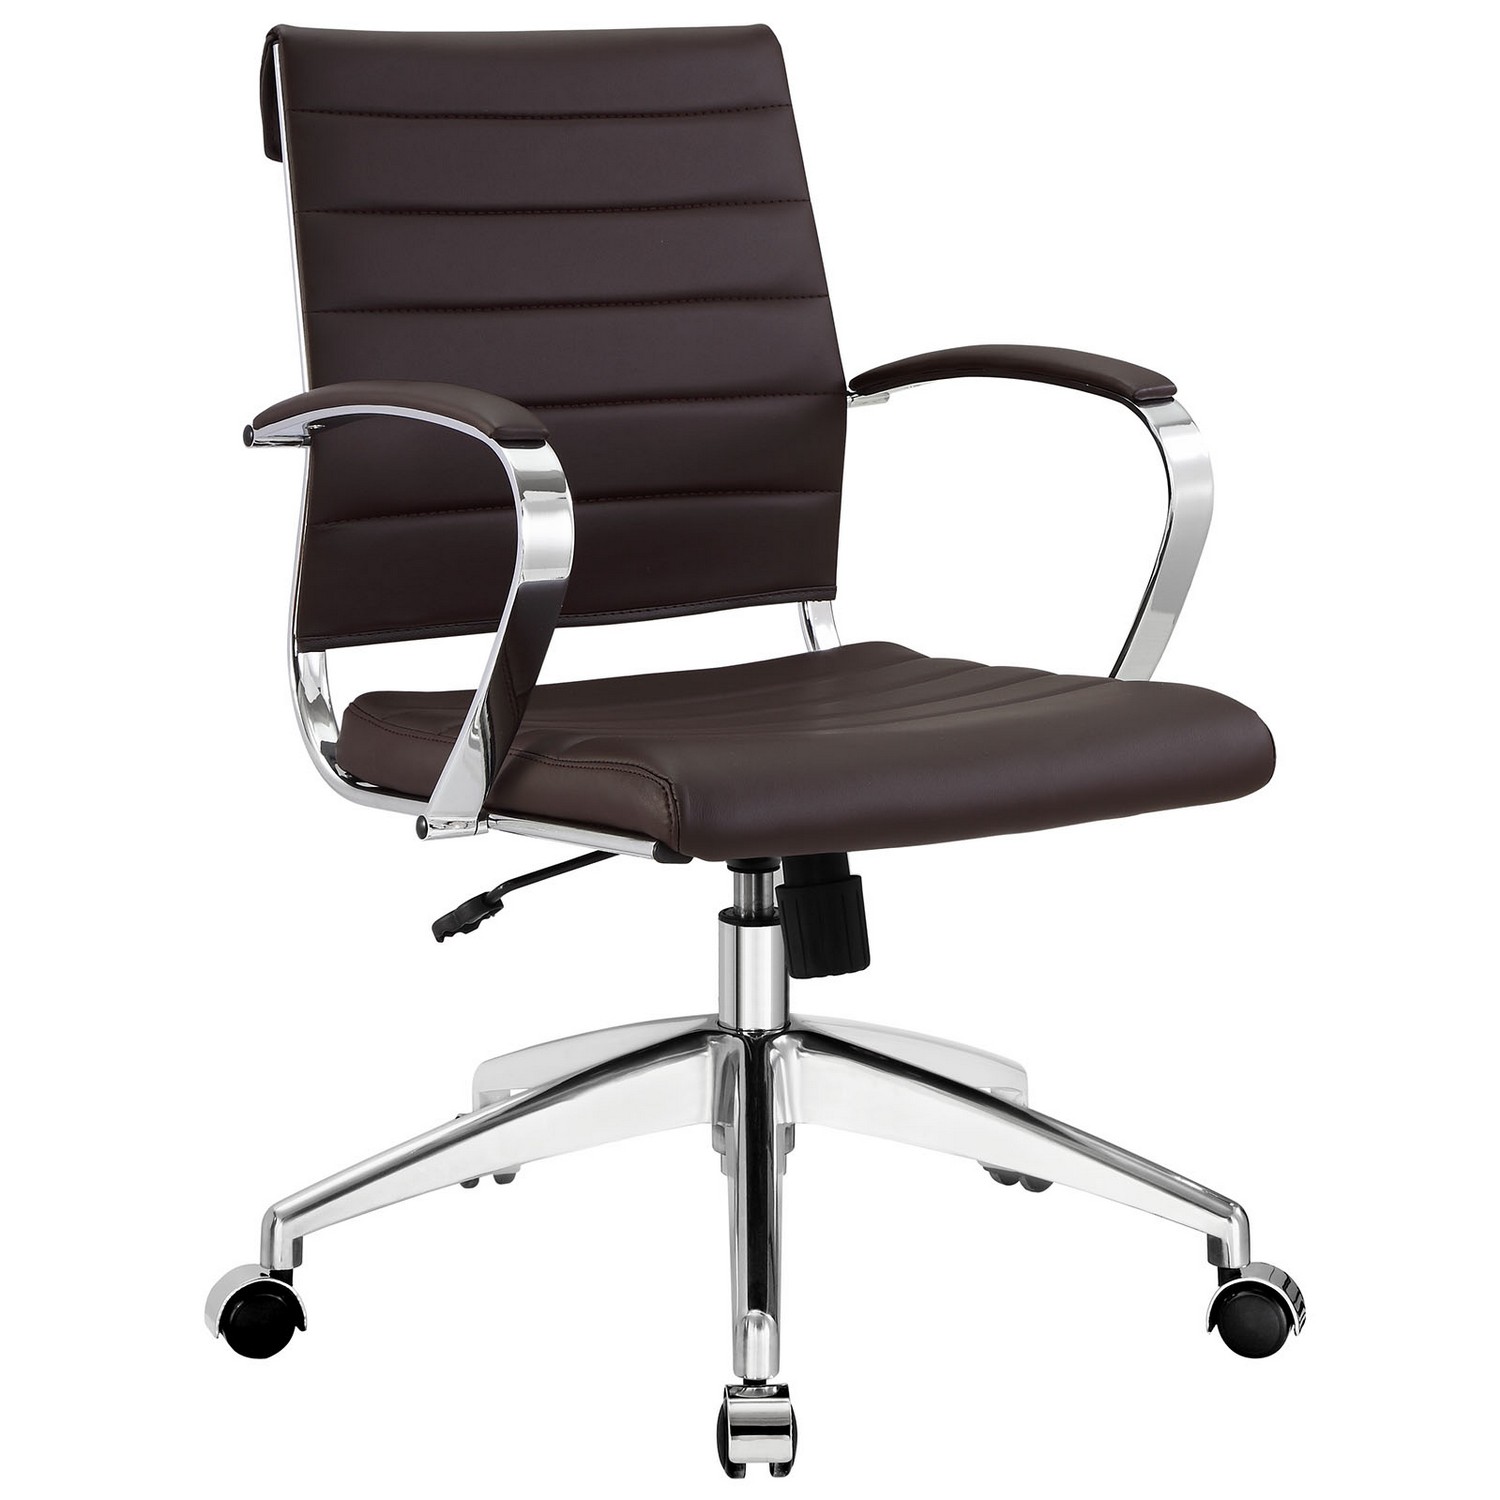 Modway Jive Mid Back Office Chair - Brown